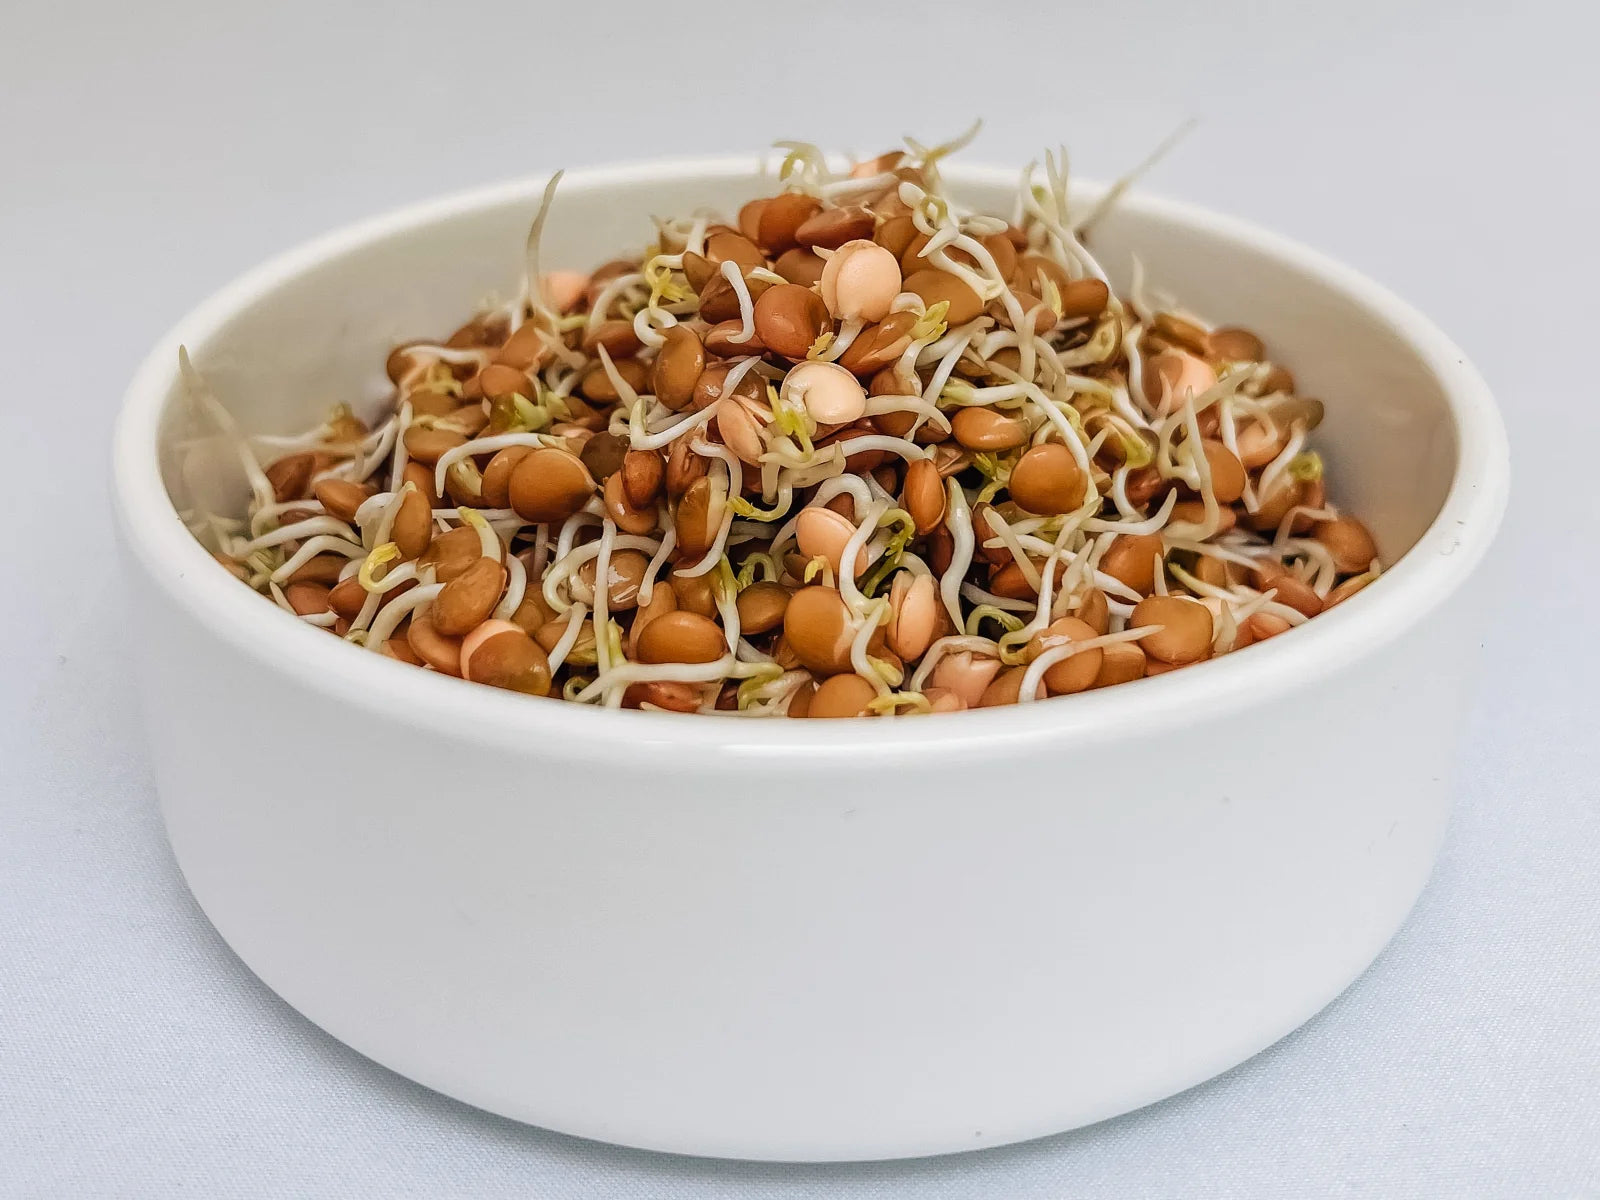 Lentil Sprouts in a Bowl